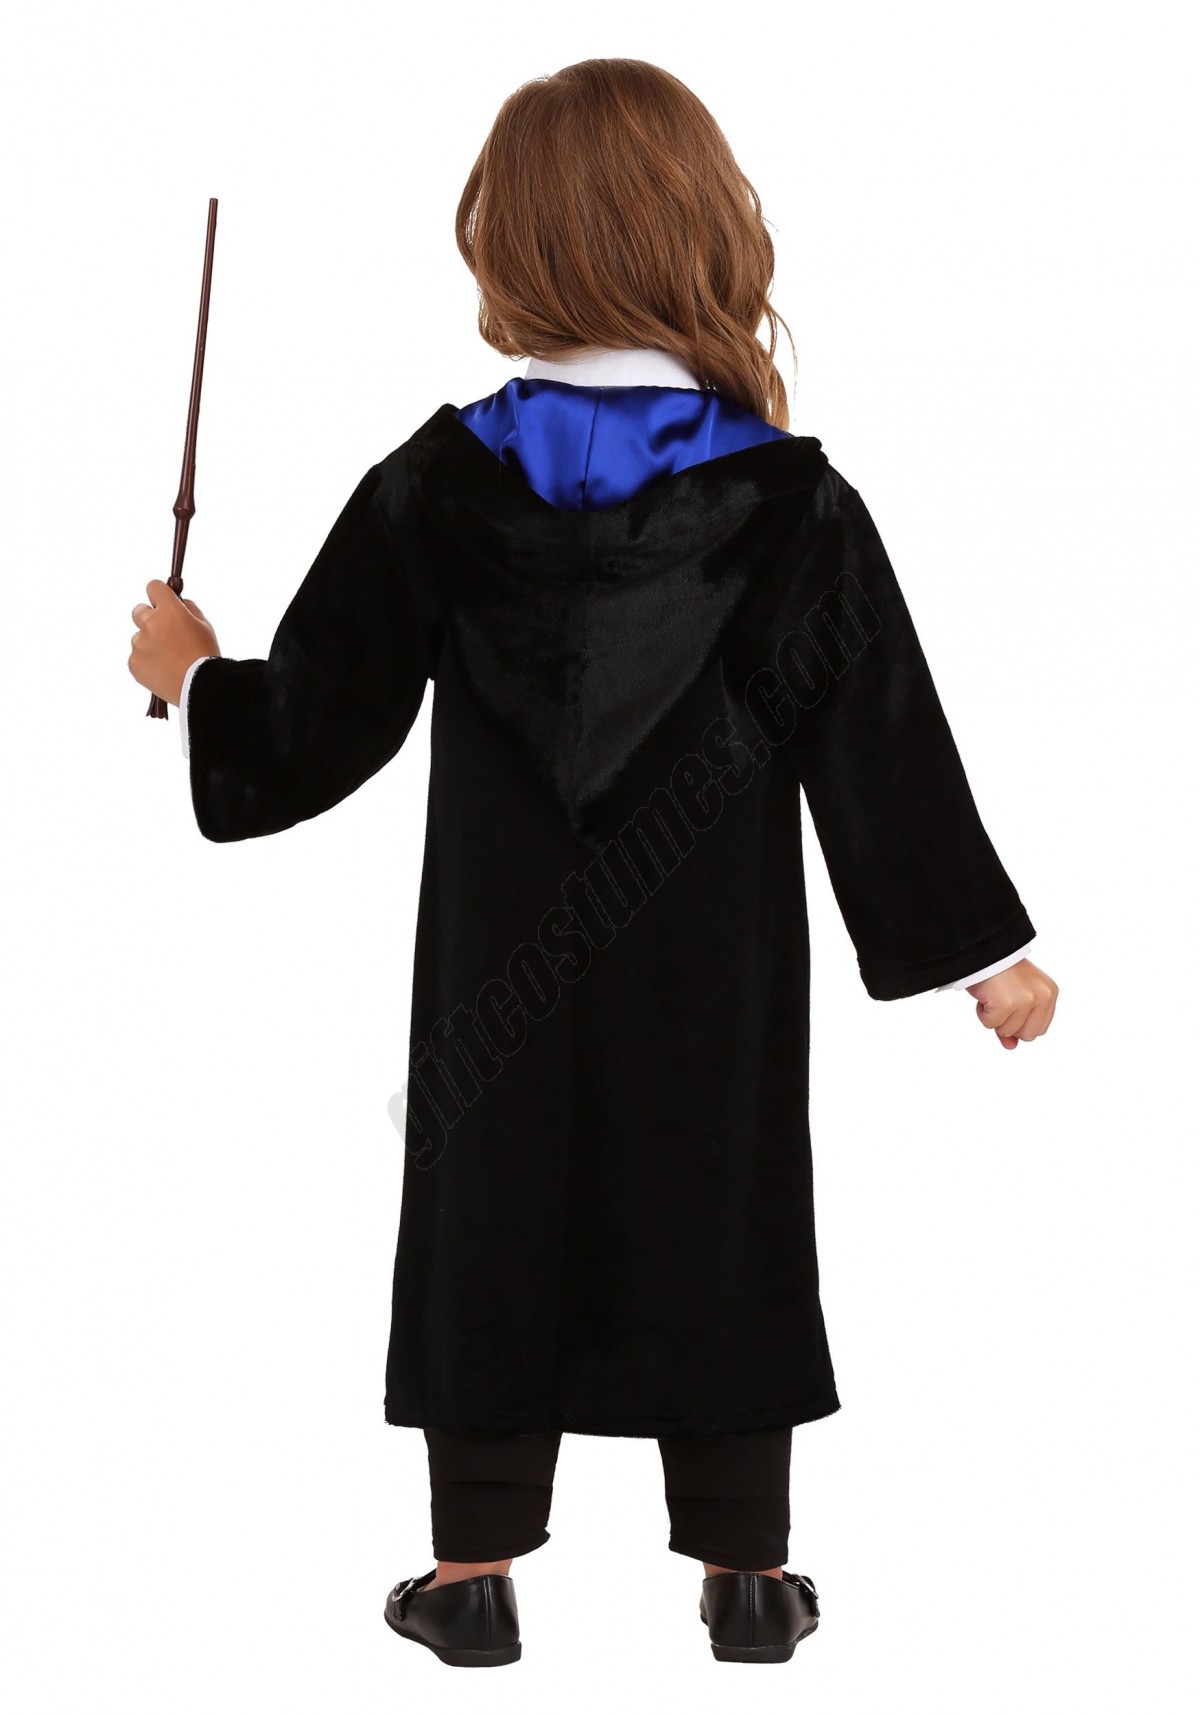 Harry Potter Kids Deluxe Ravenclaw Robe Costume Promotions - -1